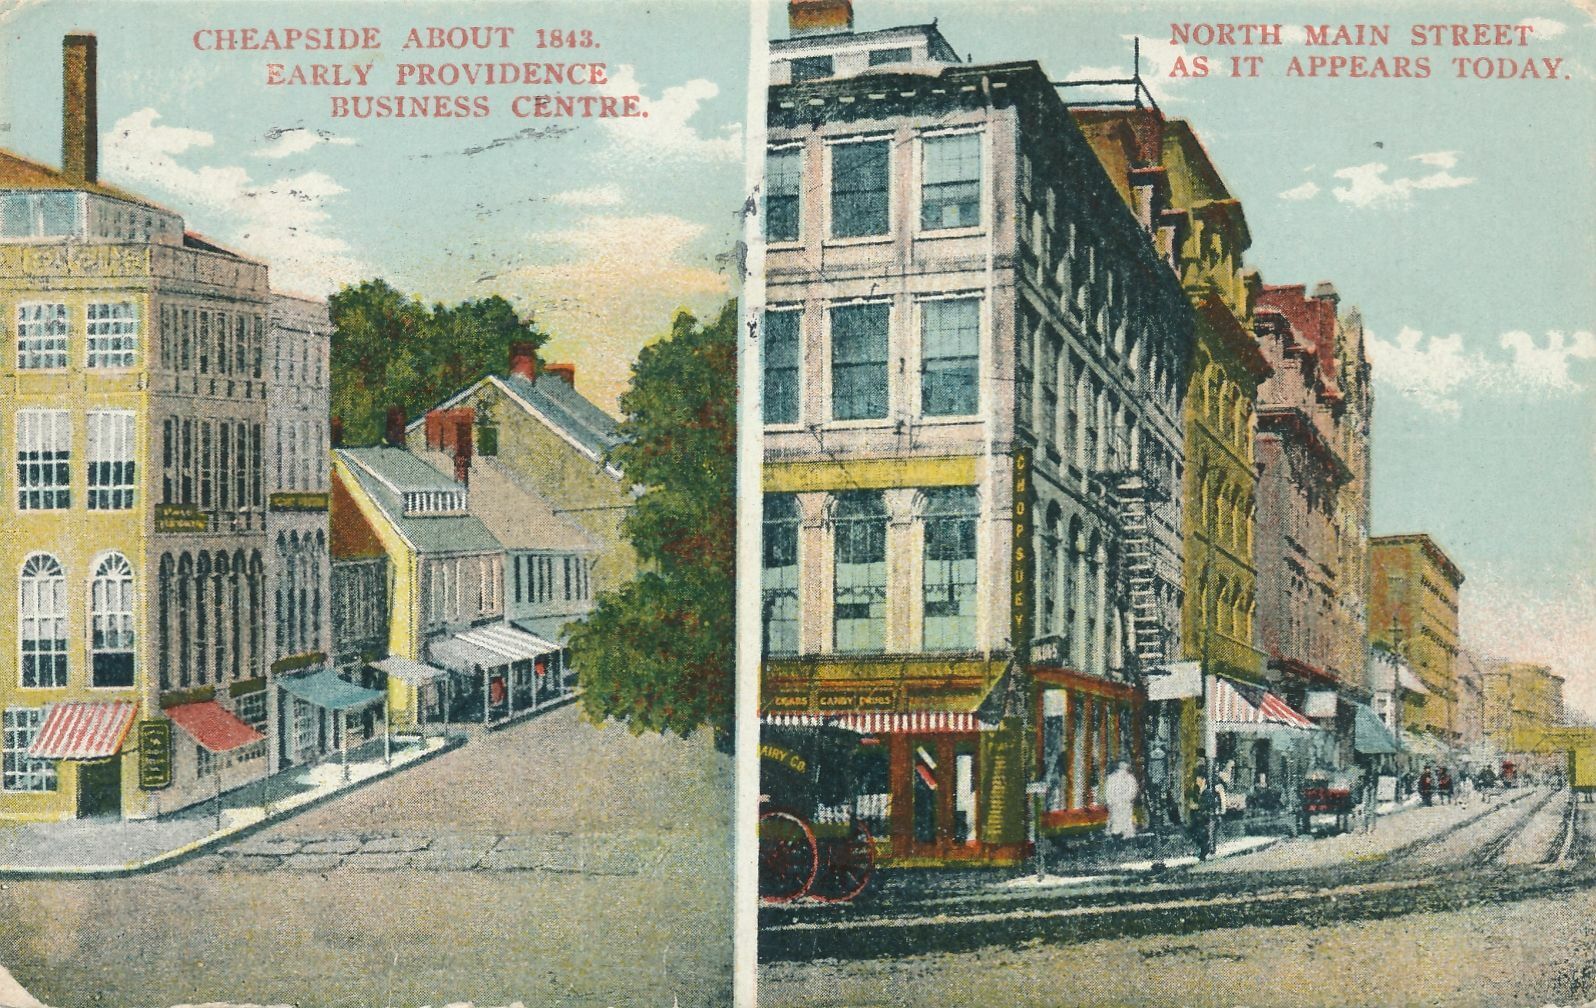 PROVIDENCE RI - Cheapside About 1843 and North Main Street As It Appears Today